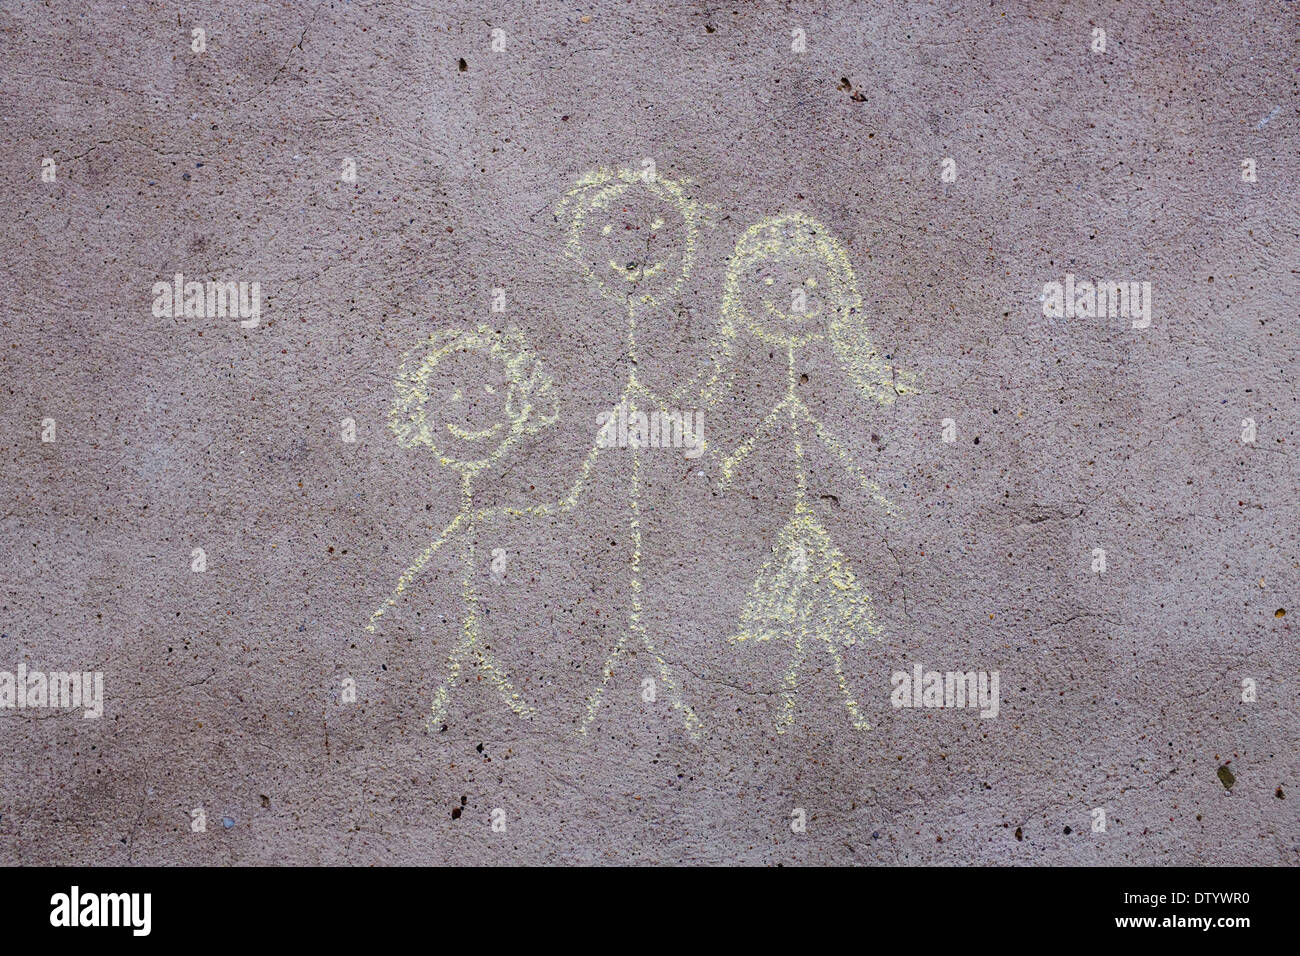 Child's drawing, chalk on concrete, mother, father, child Stock Photo